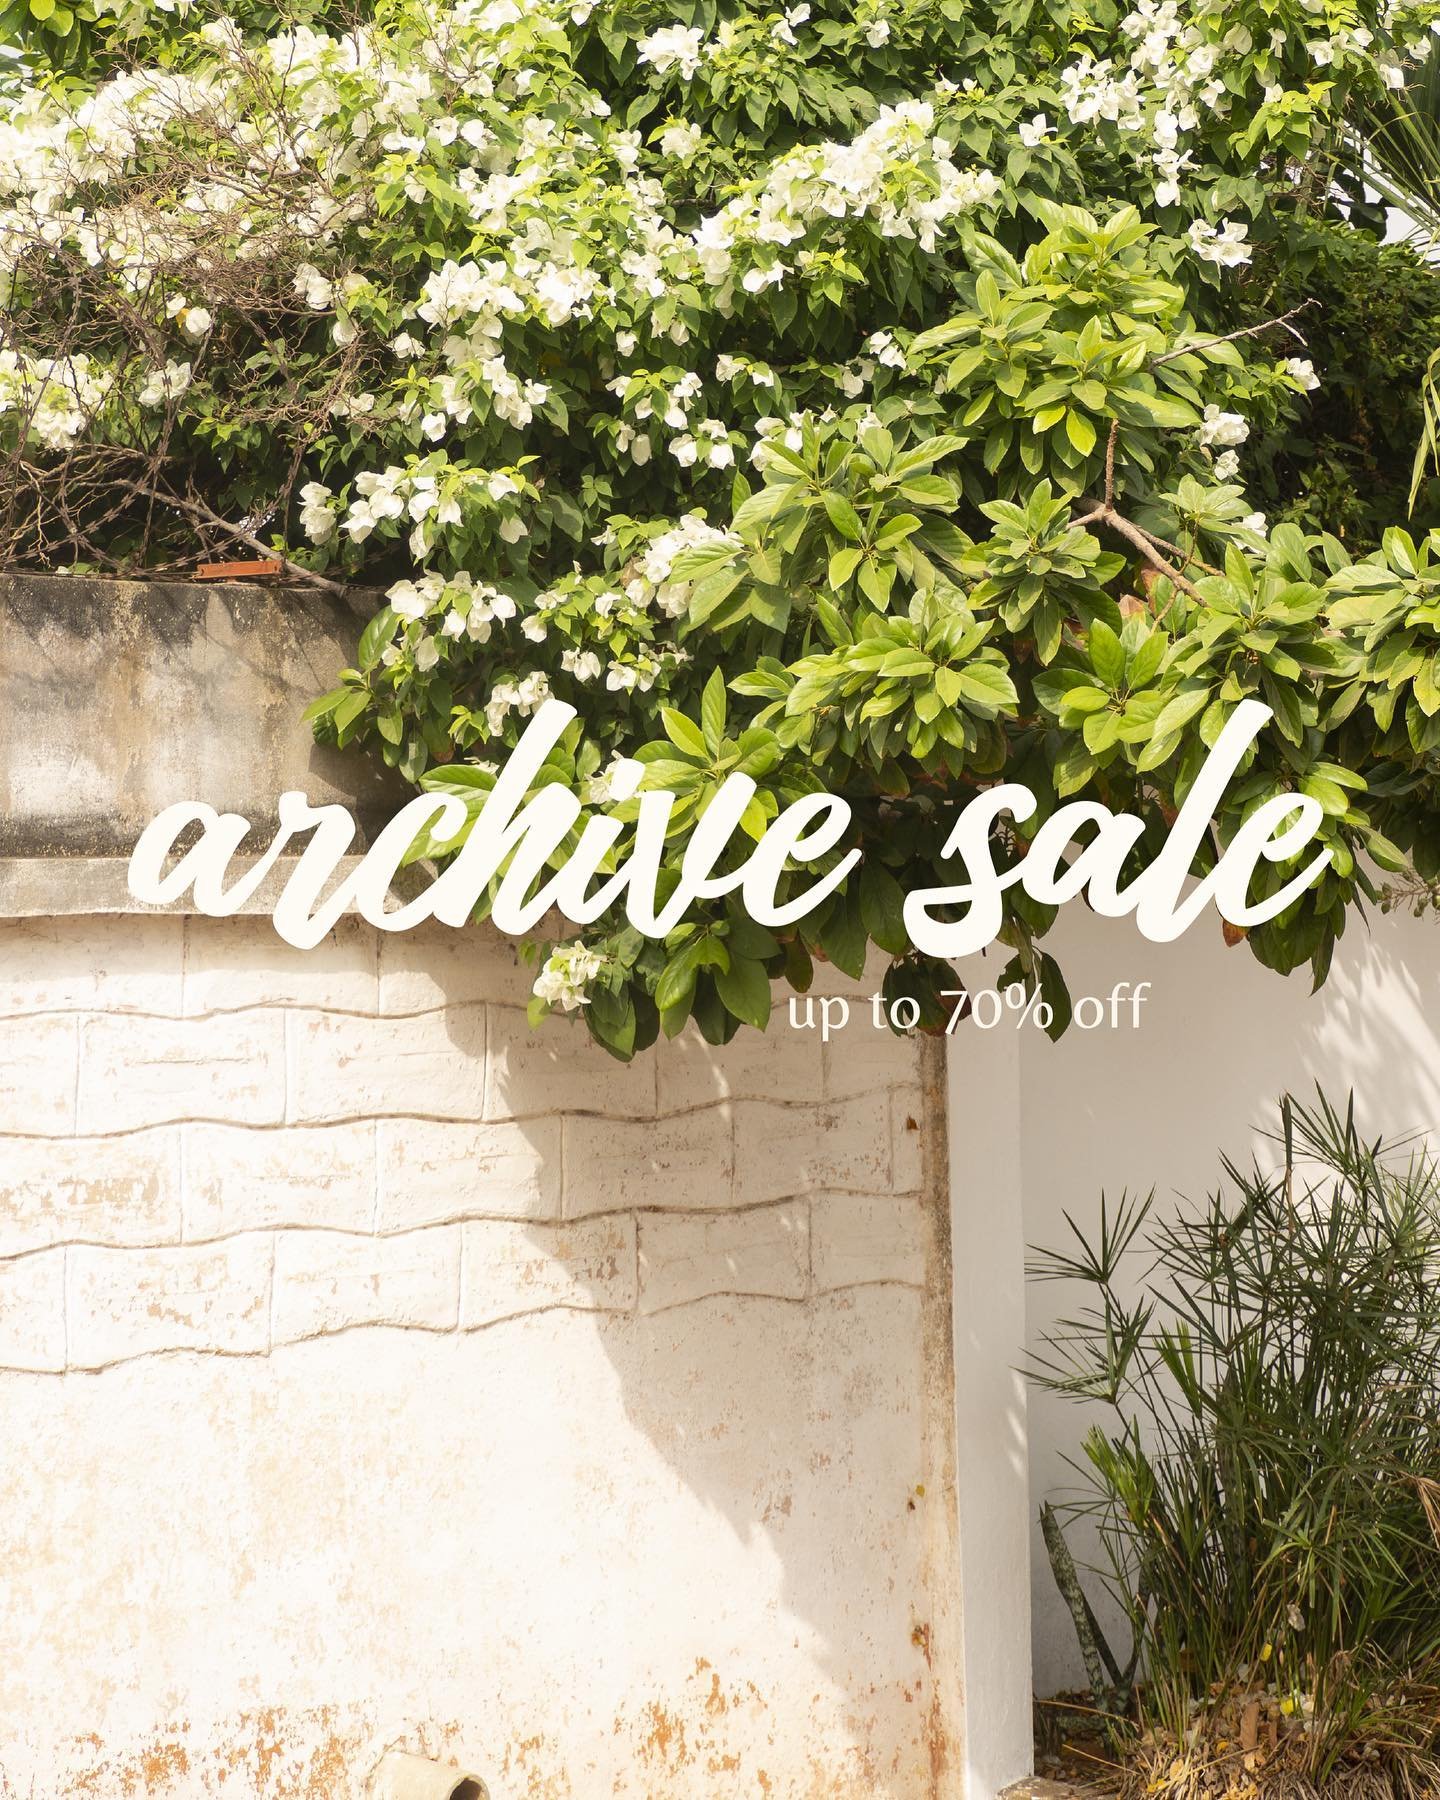 NEW RESTOCK ON OUR ARCHIVE SALE! 🌟 up to 70% off

We have just added a variety of unique woven pieces to our ARCHIVE SALE store!

There is only ONE piece for each design. These items may have been produced as samples or used for photoshoots and may 